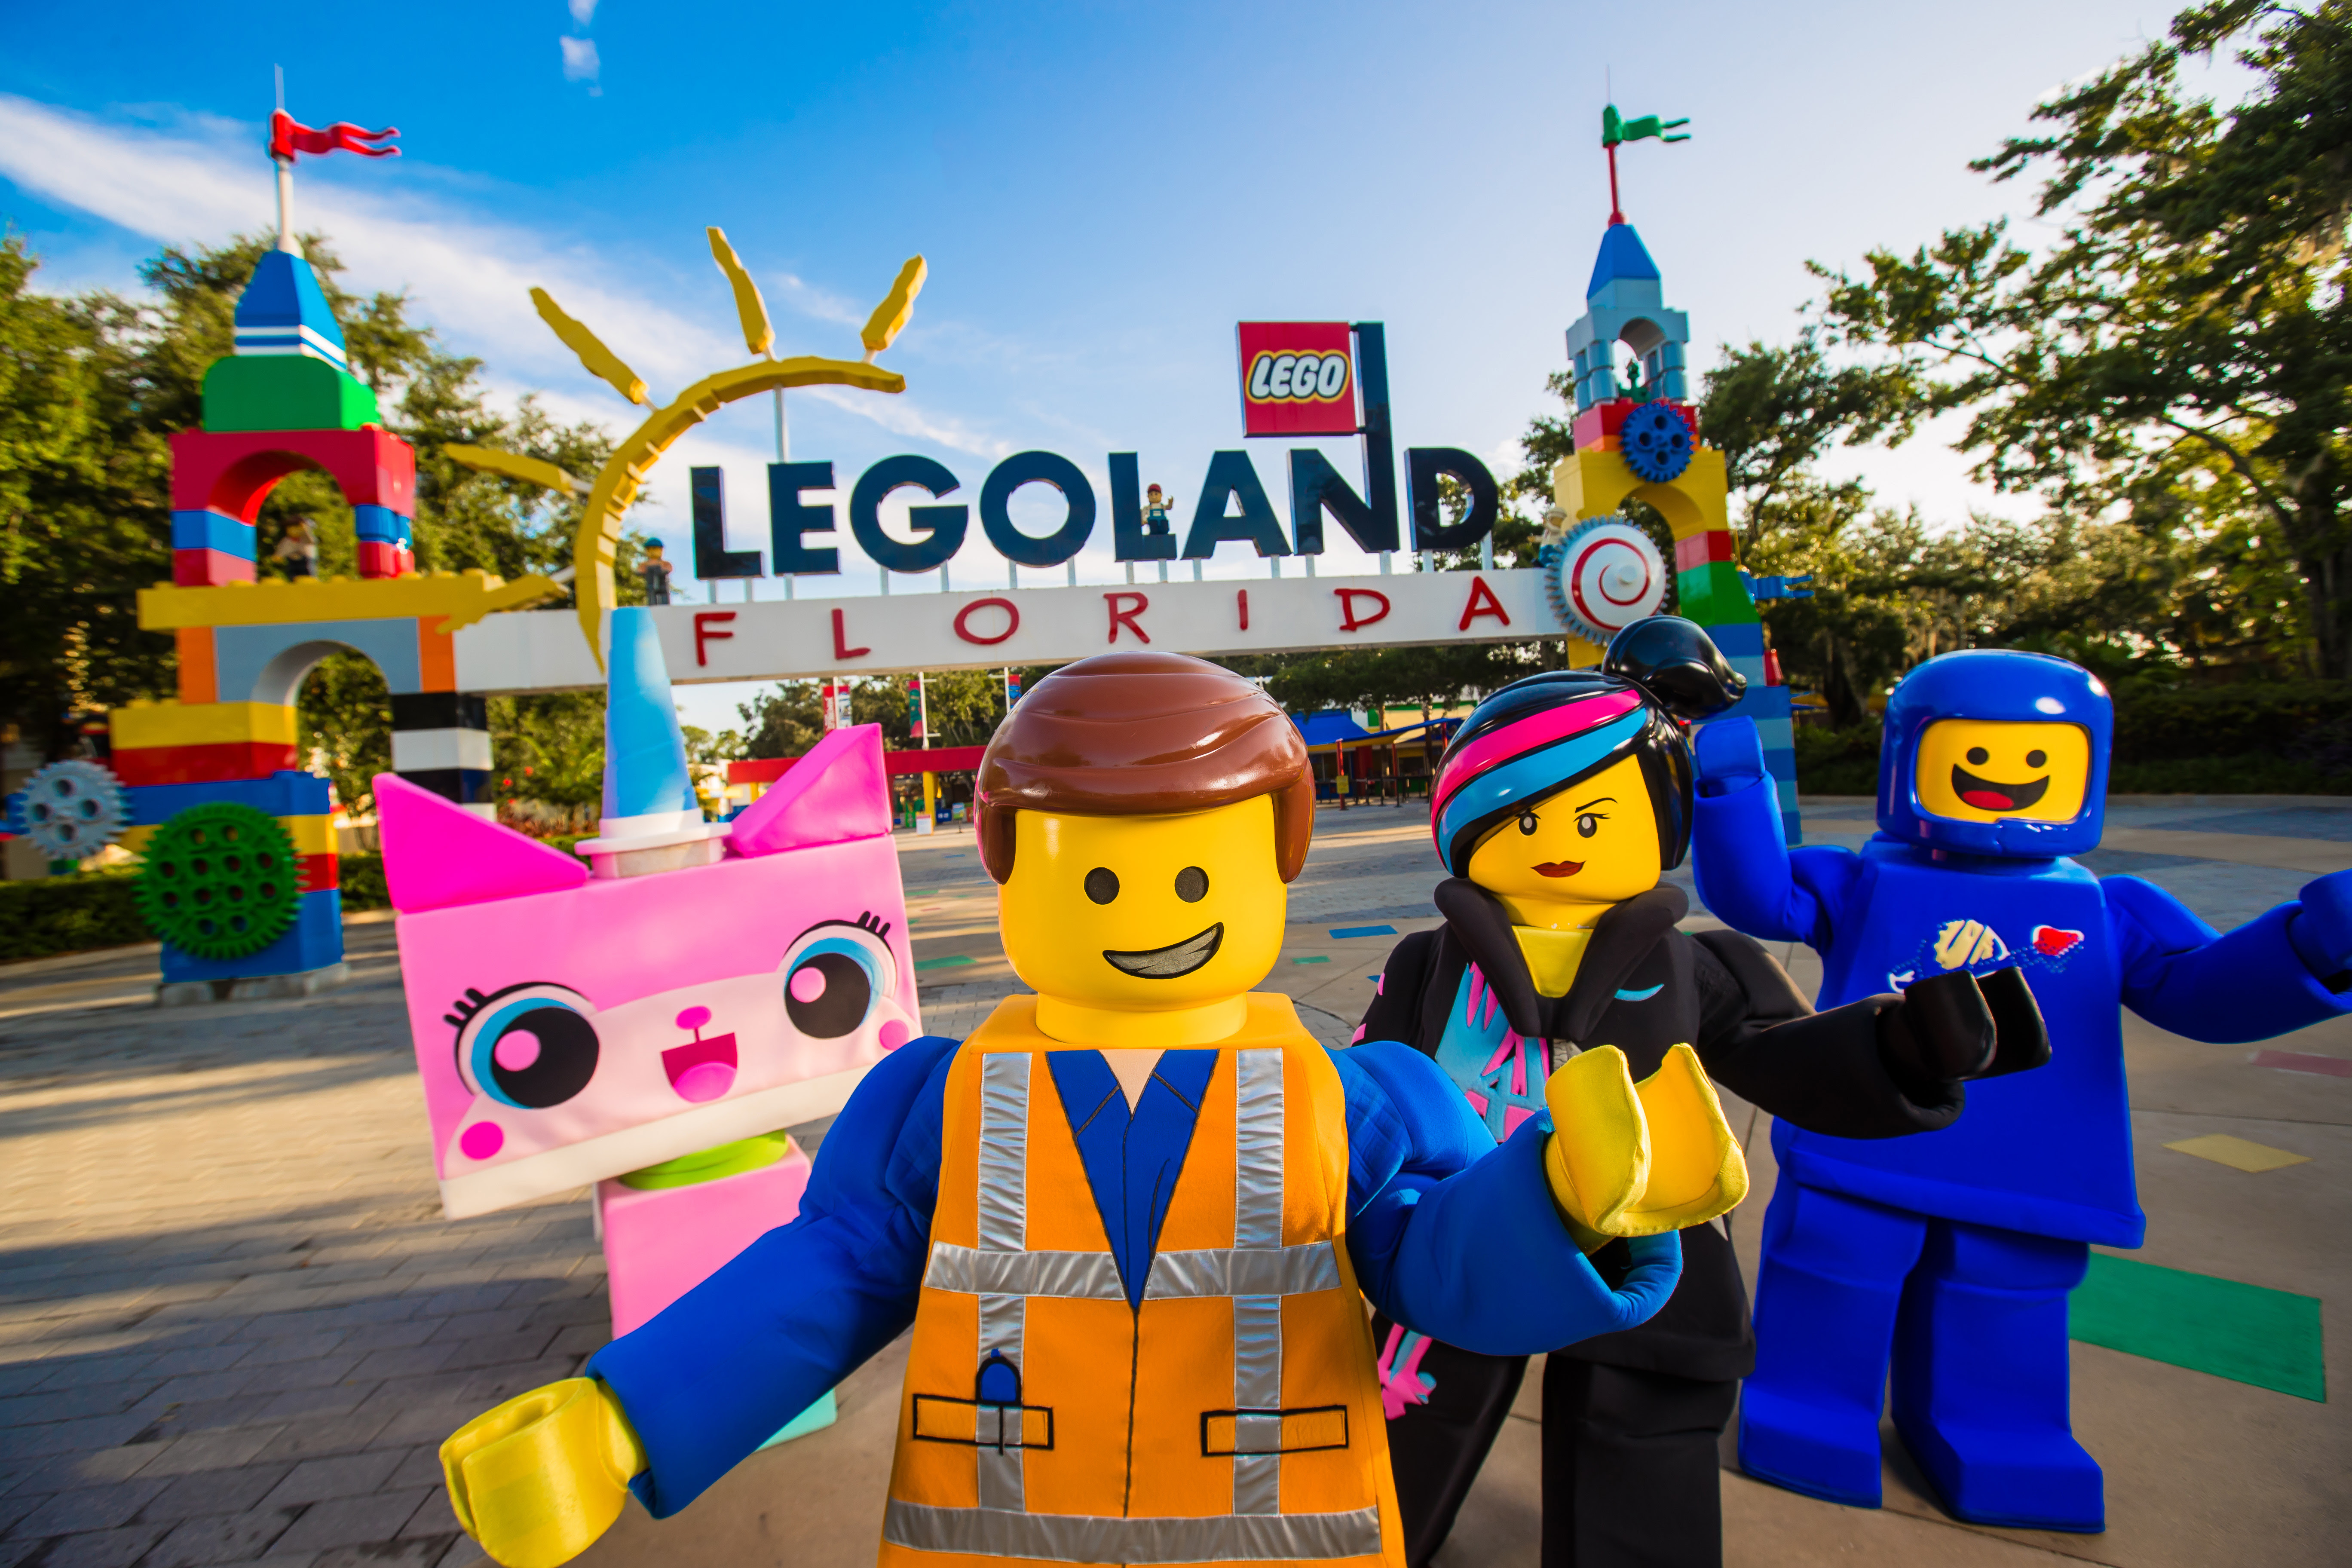 LEGOLAND Florida Resort and Merlin Entertainments Attractions Offers Big Savings with Cinco de Mayo Sale